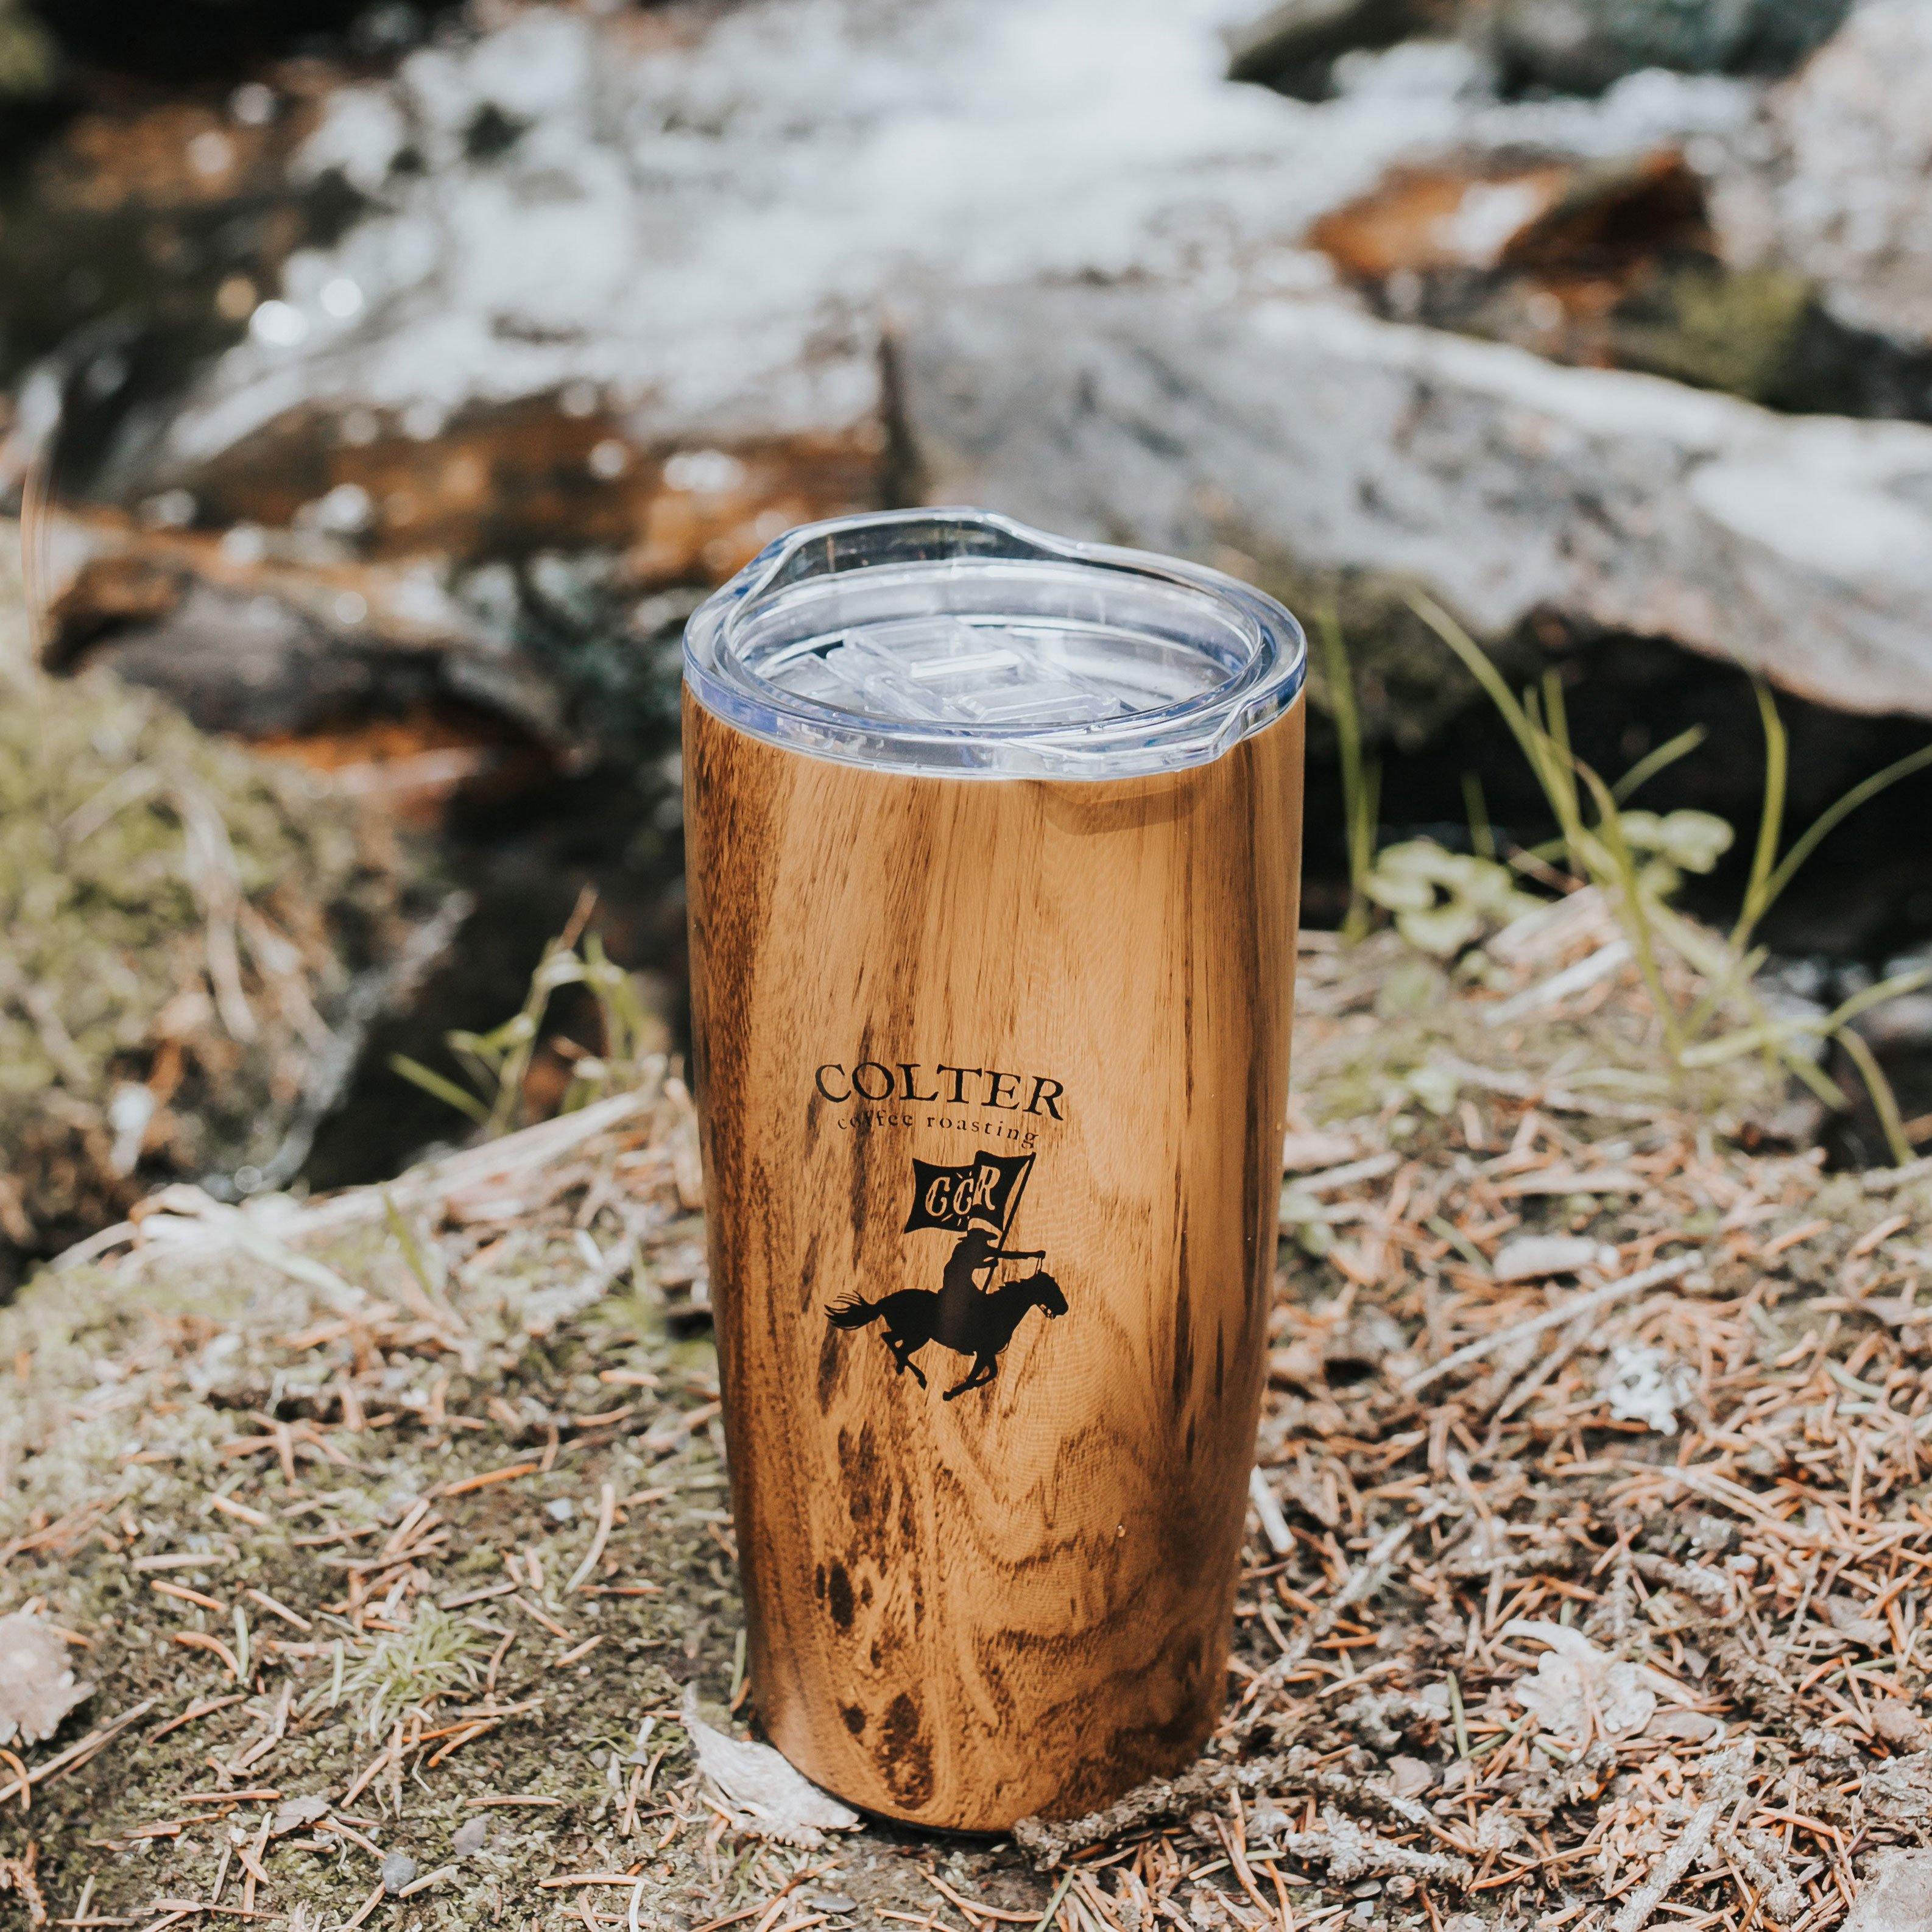 Woods Insulated Tumbler